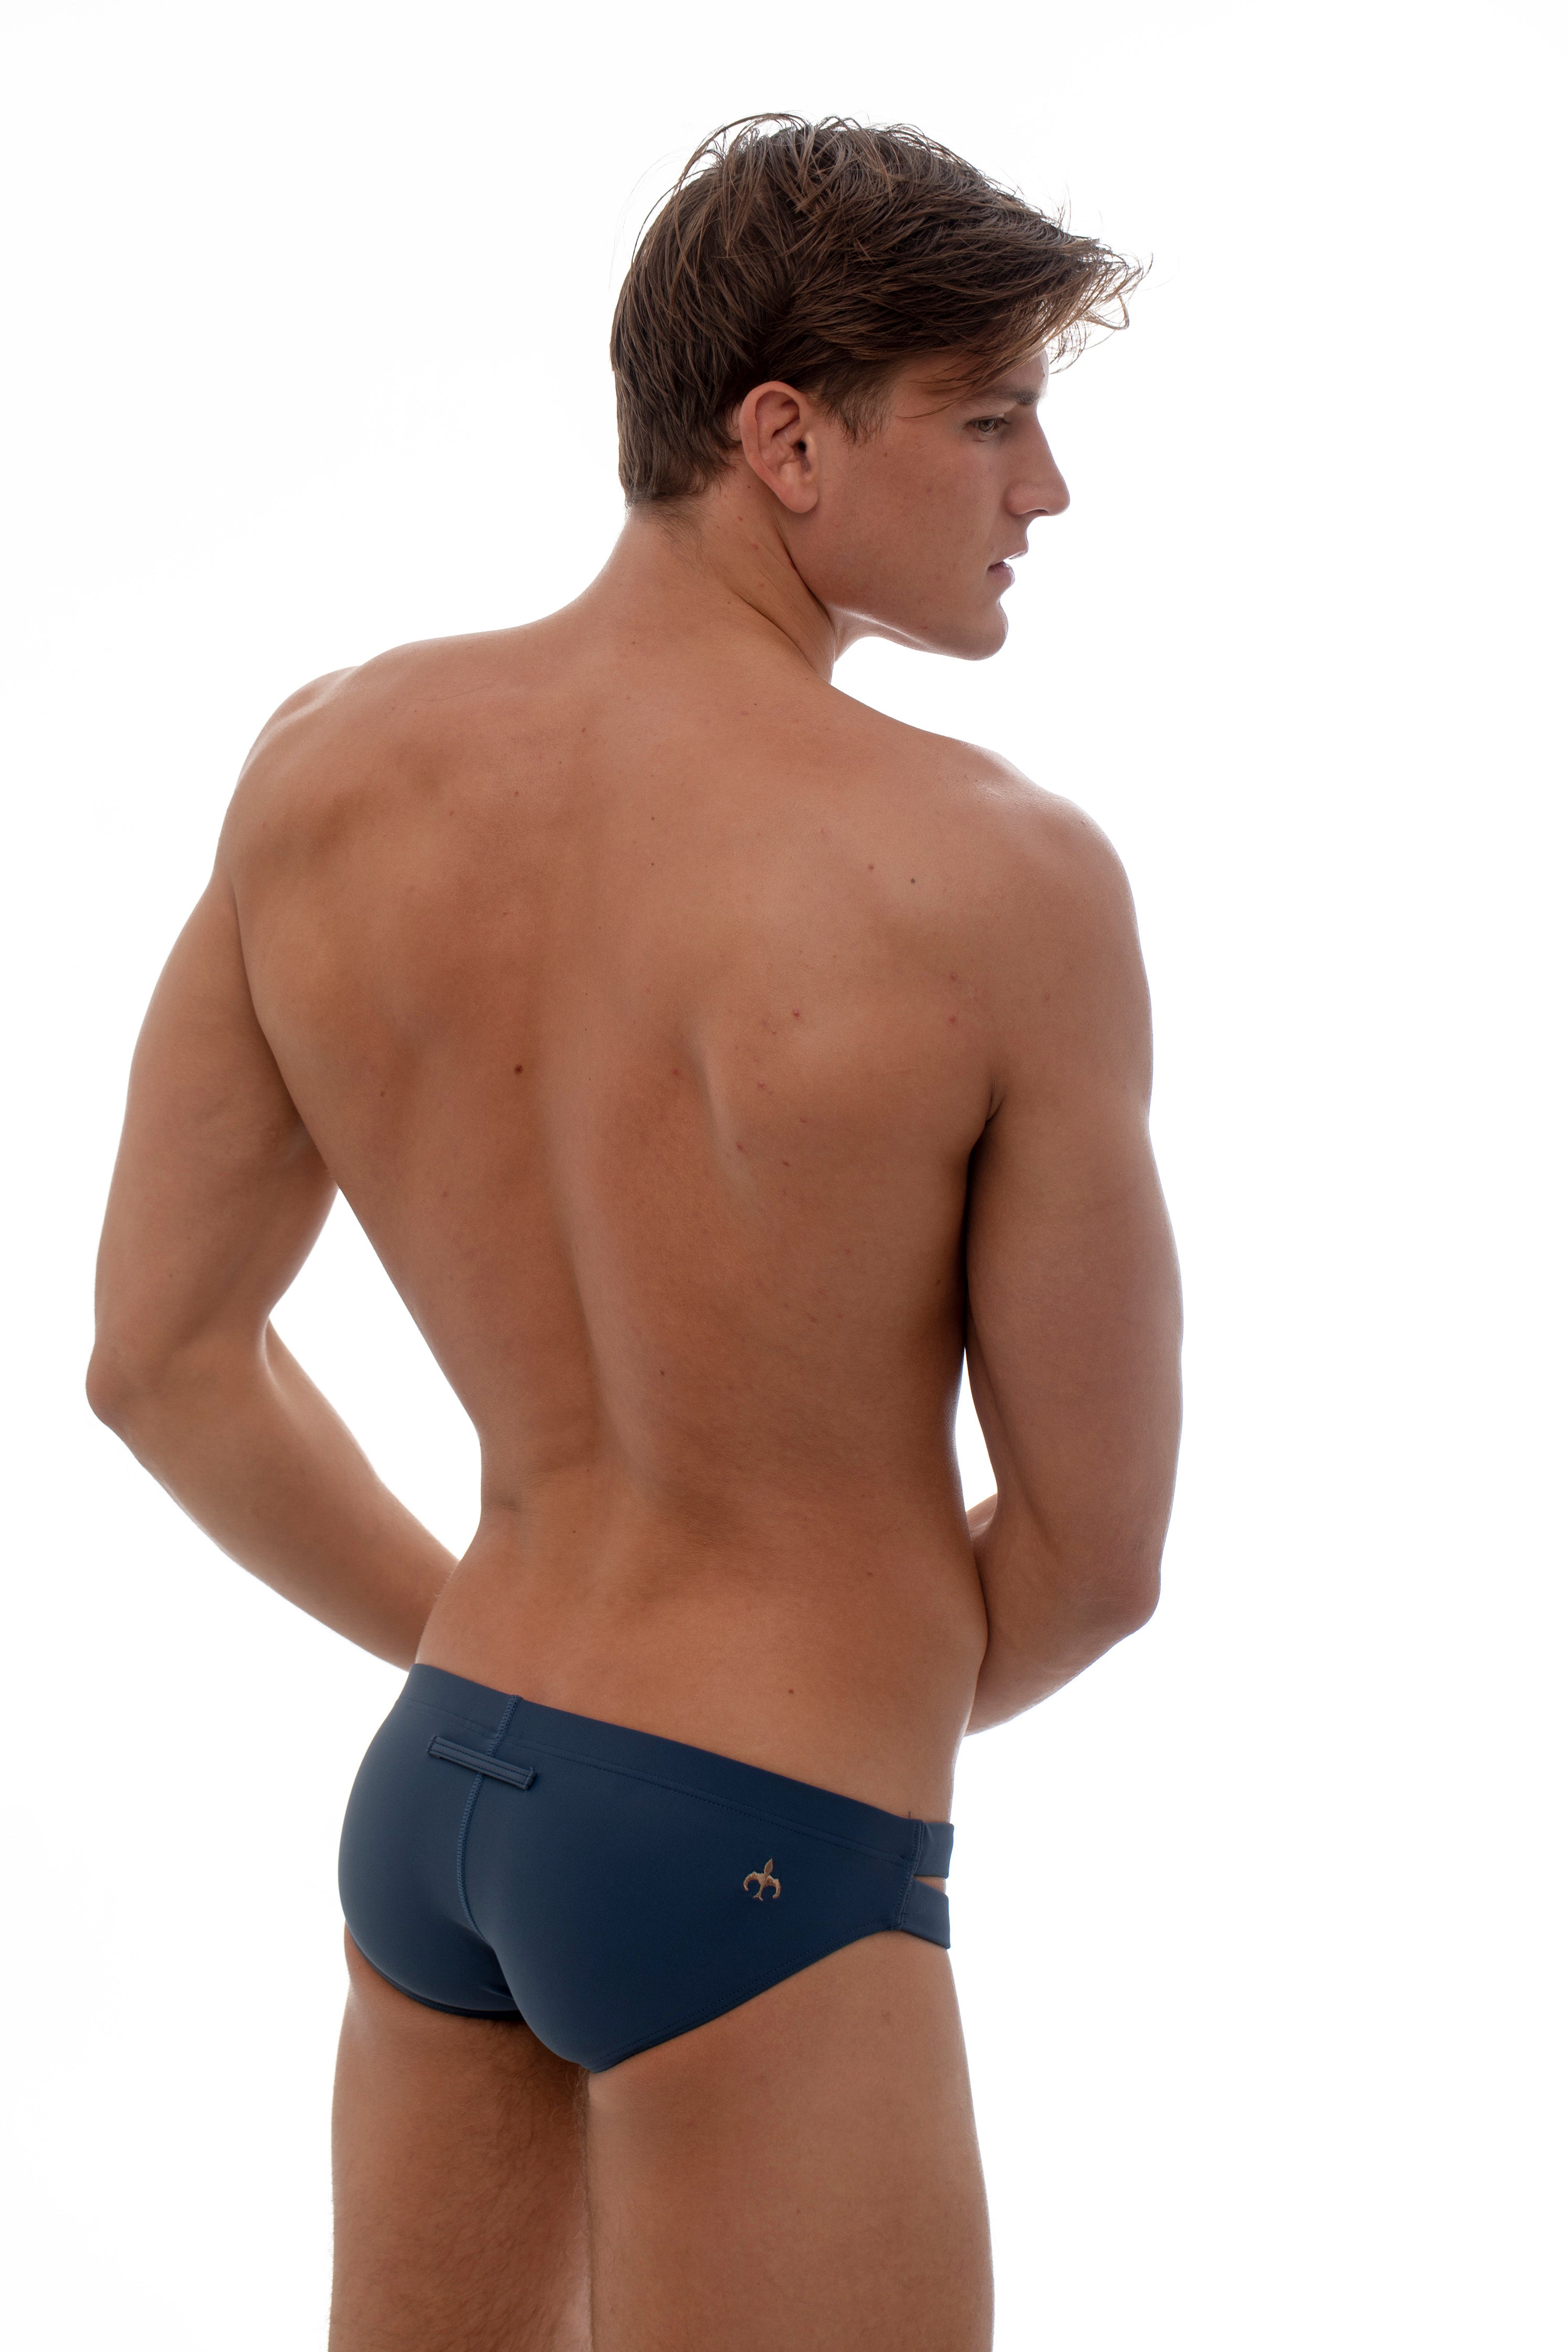 Marcuse bound swim brief in navy with double open straps on the sides.